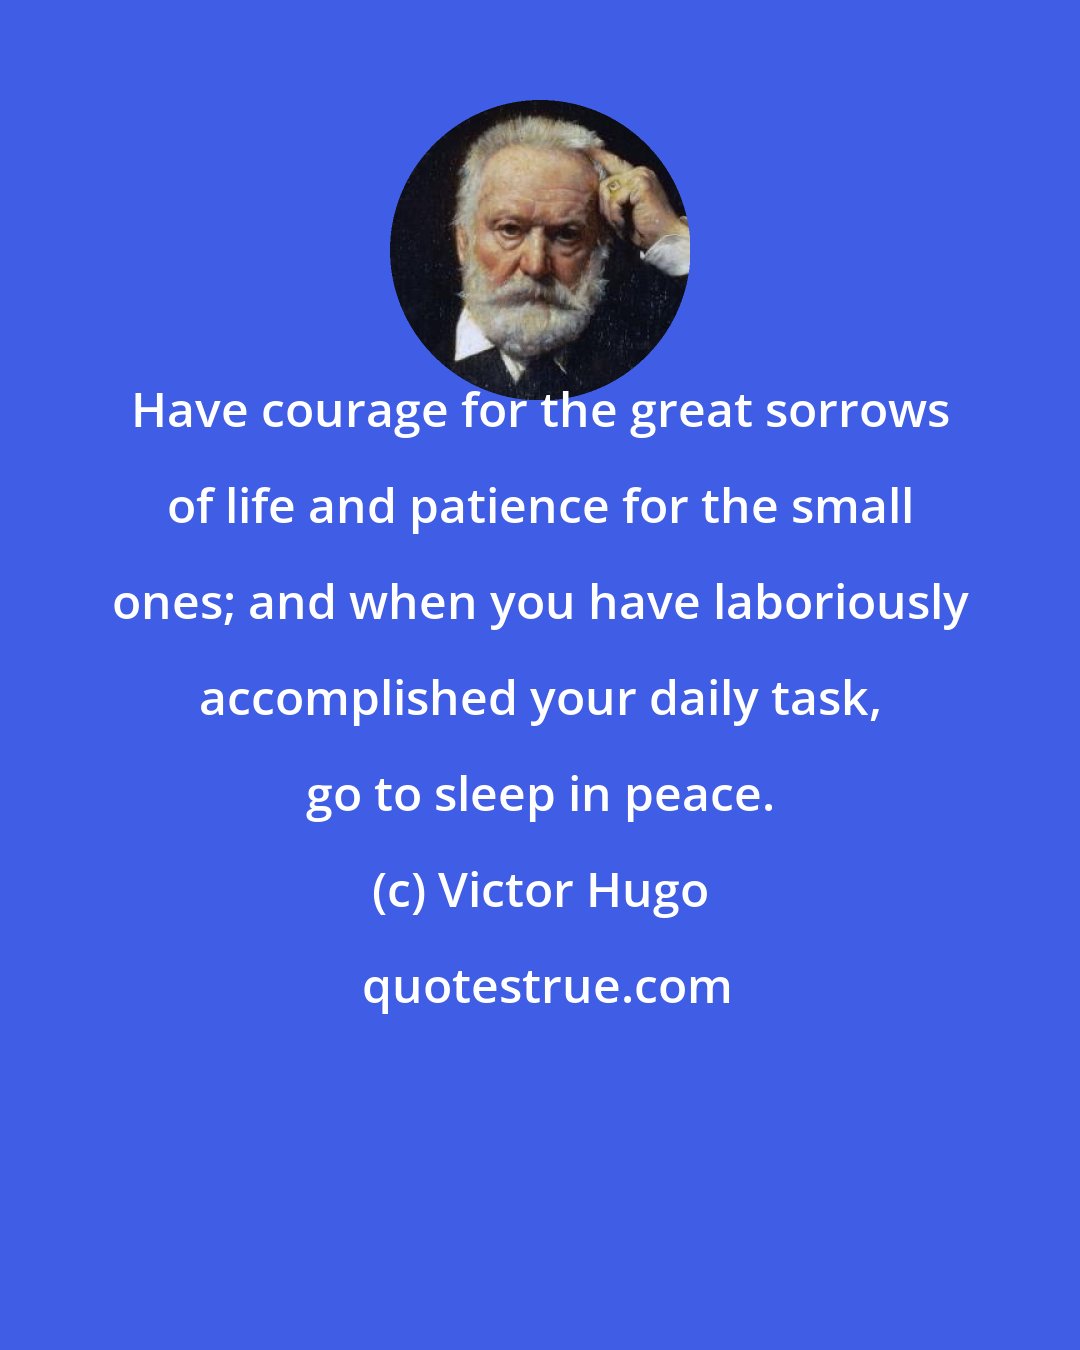 Victor Hugo: Have courage for the great sorrows of life and patience for the small ones; and when you have laboriously accomplished your daily task, go to sleep in peace.